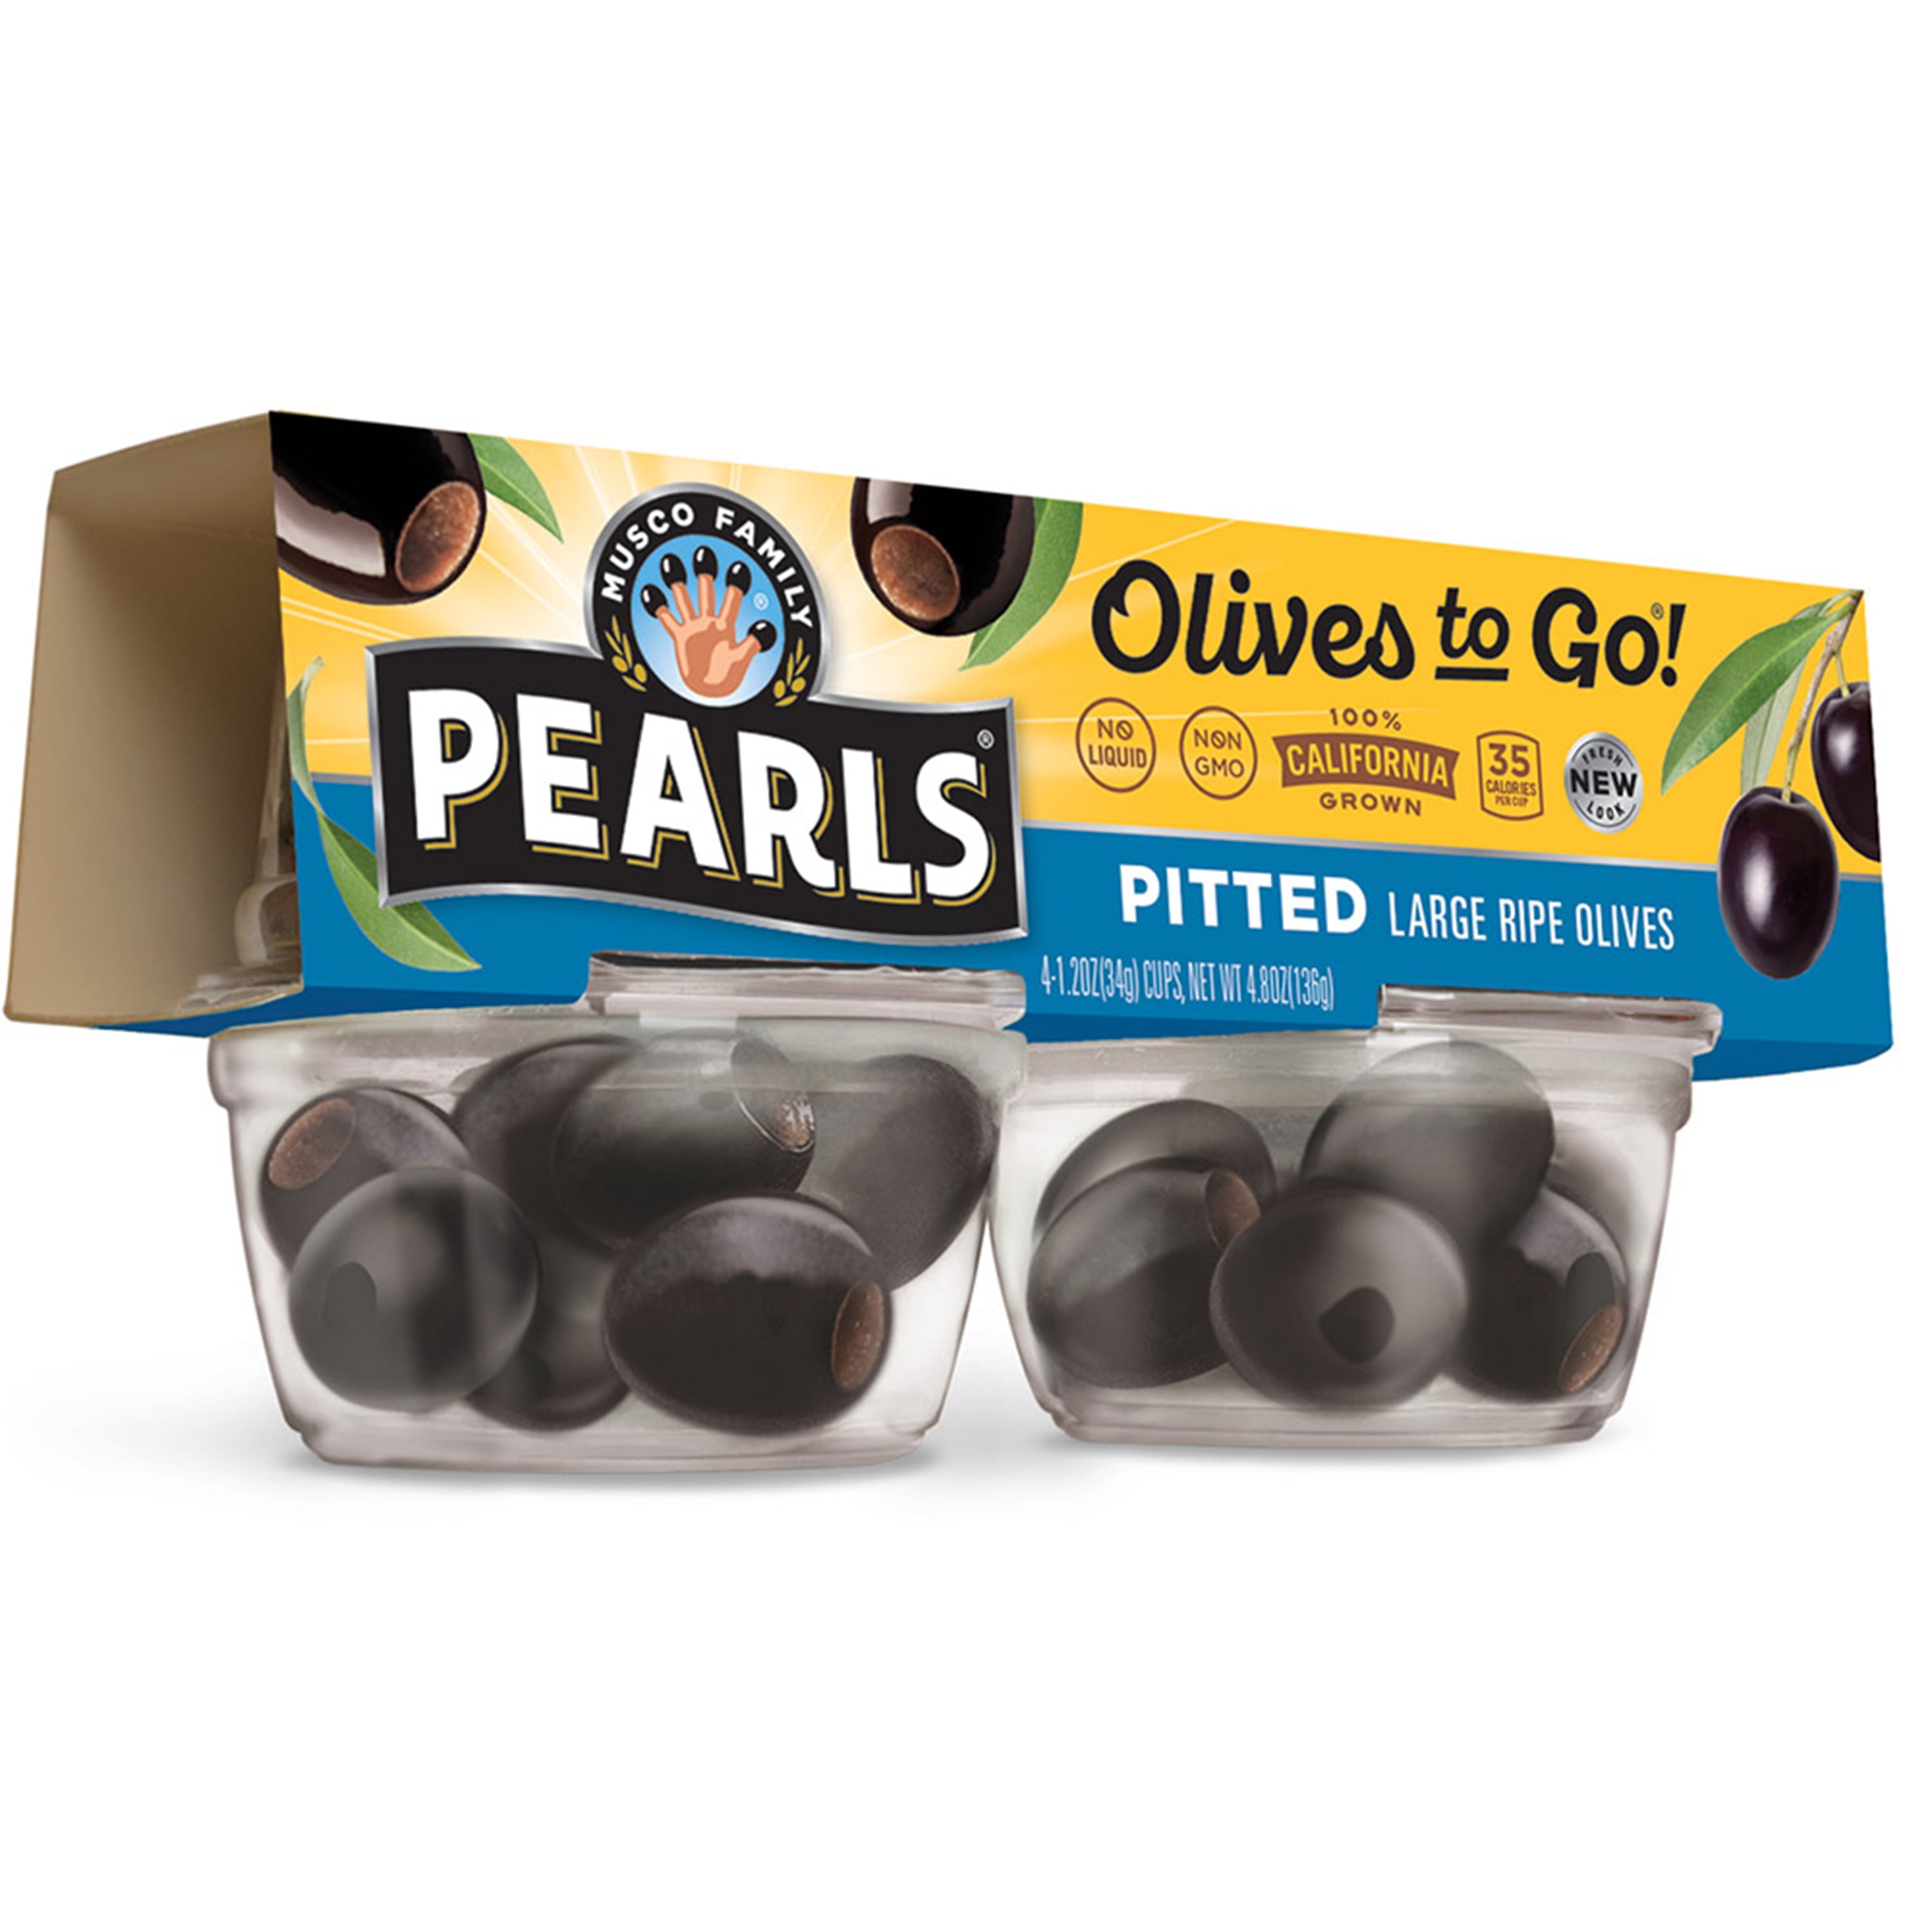 Pearls Black Pitted Large California Ripe Olives, 4 Pack, 1.2 oz. Cup